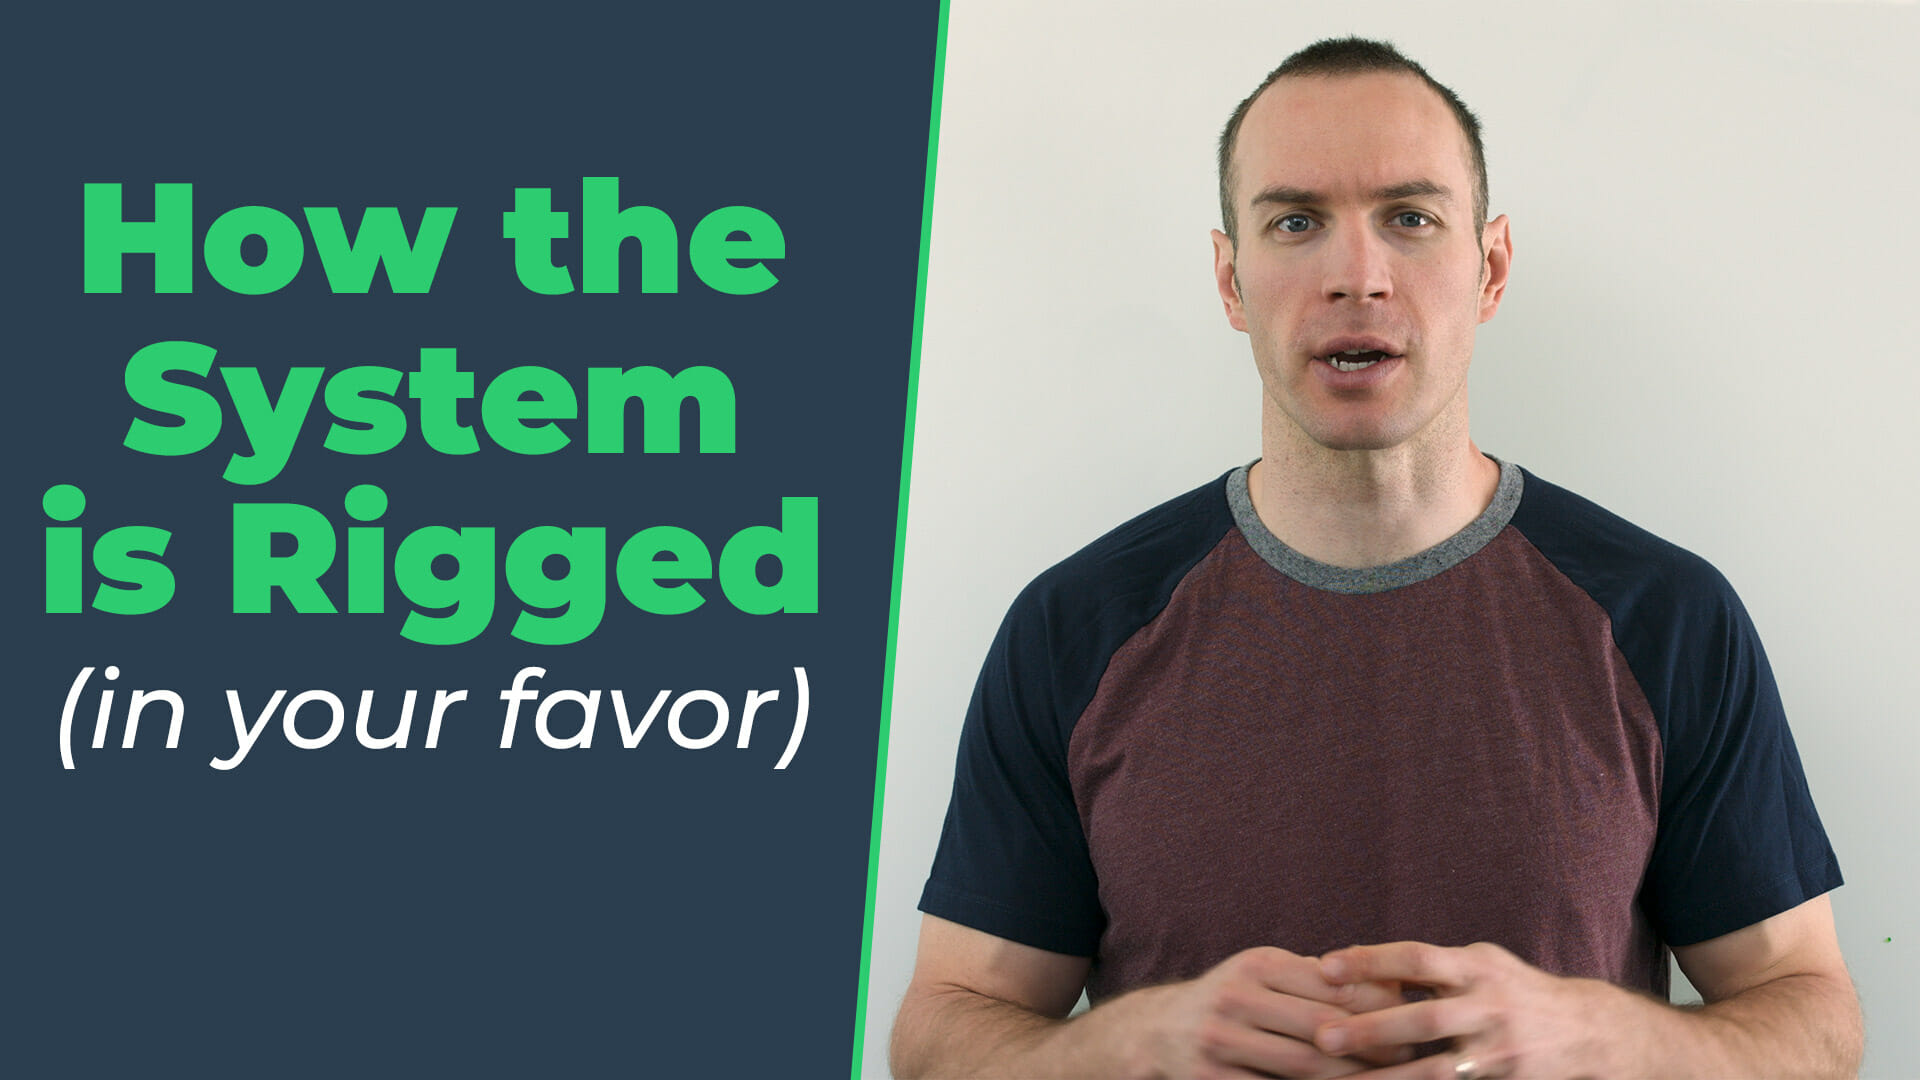 How the System is Rigged (in your favor)